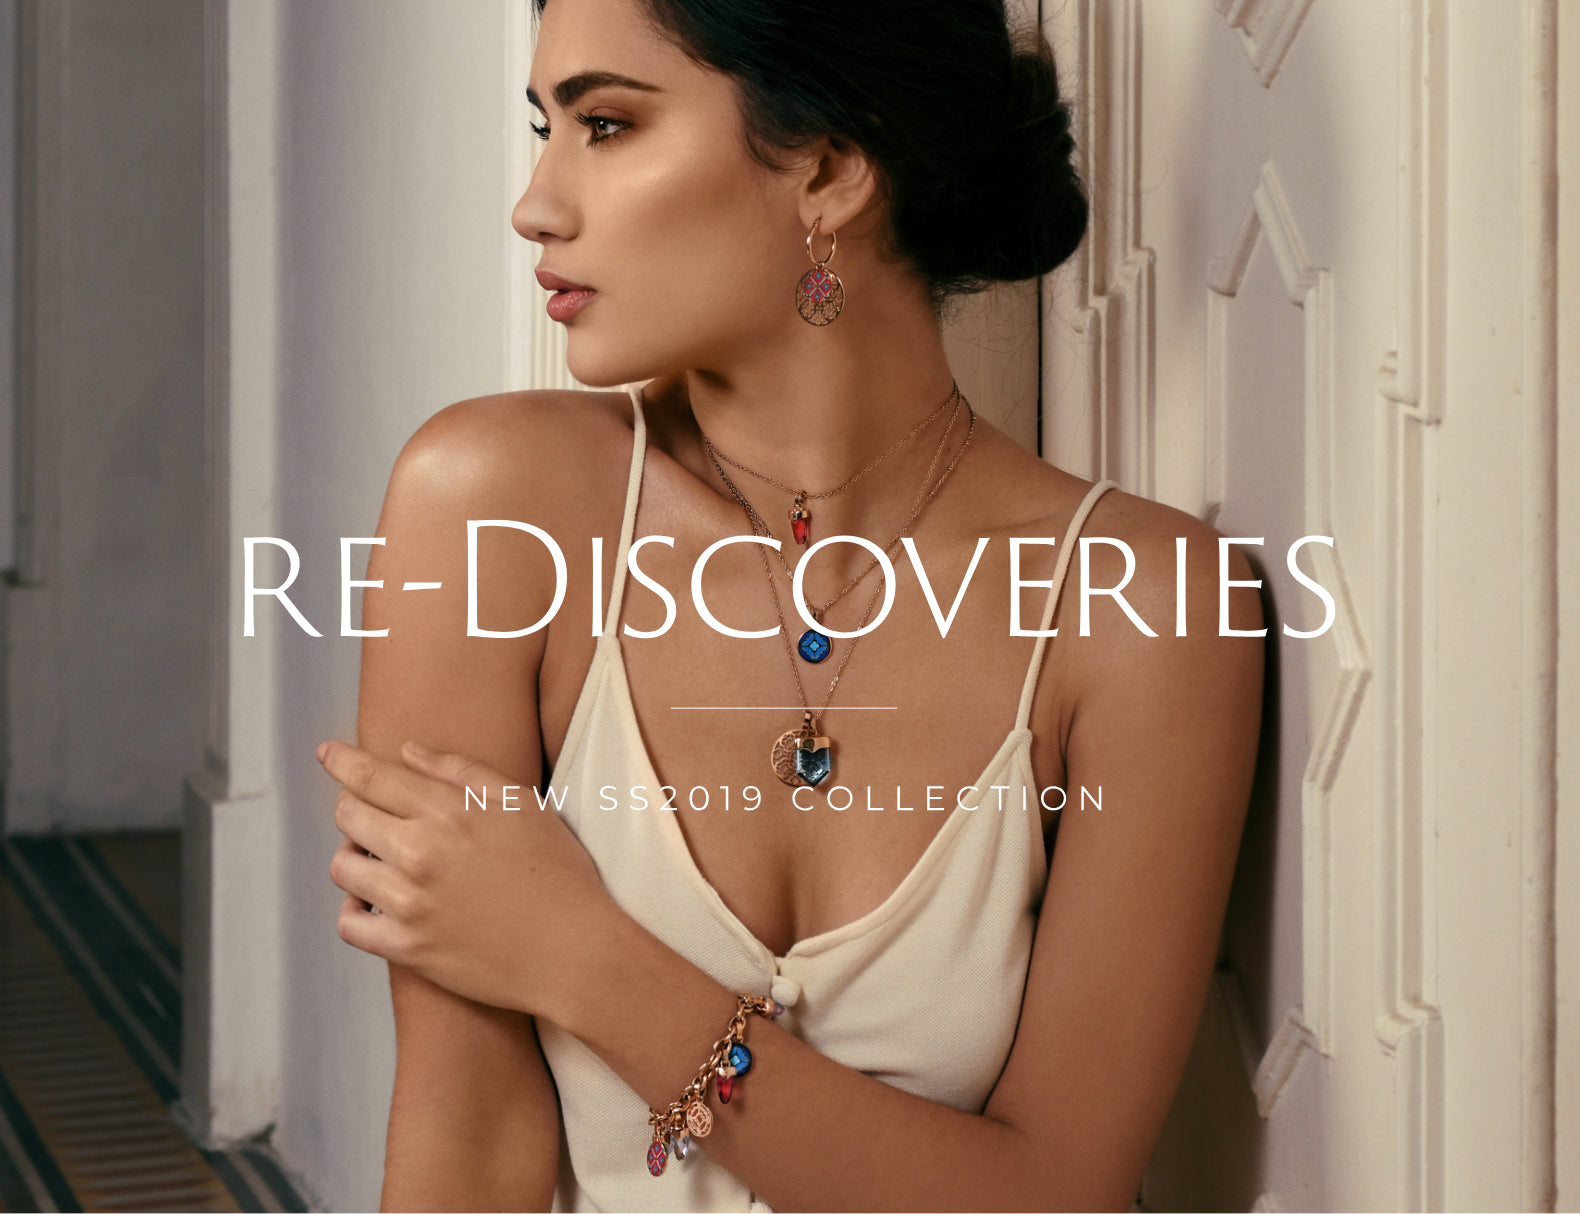 NEW SS 2019 COLLECTION - BEHIND RE-DISCOVERIES